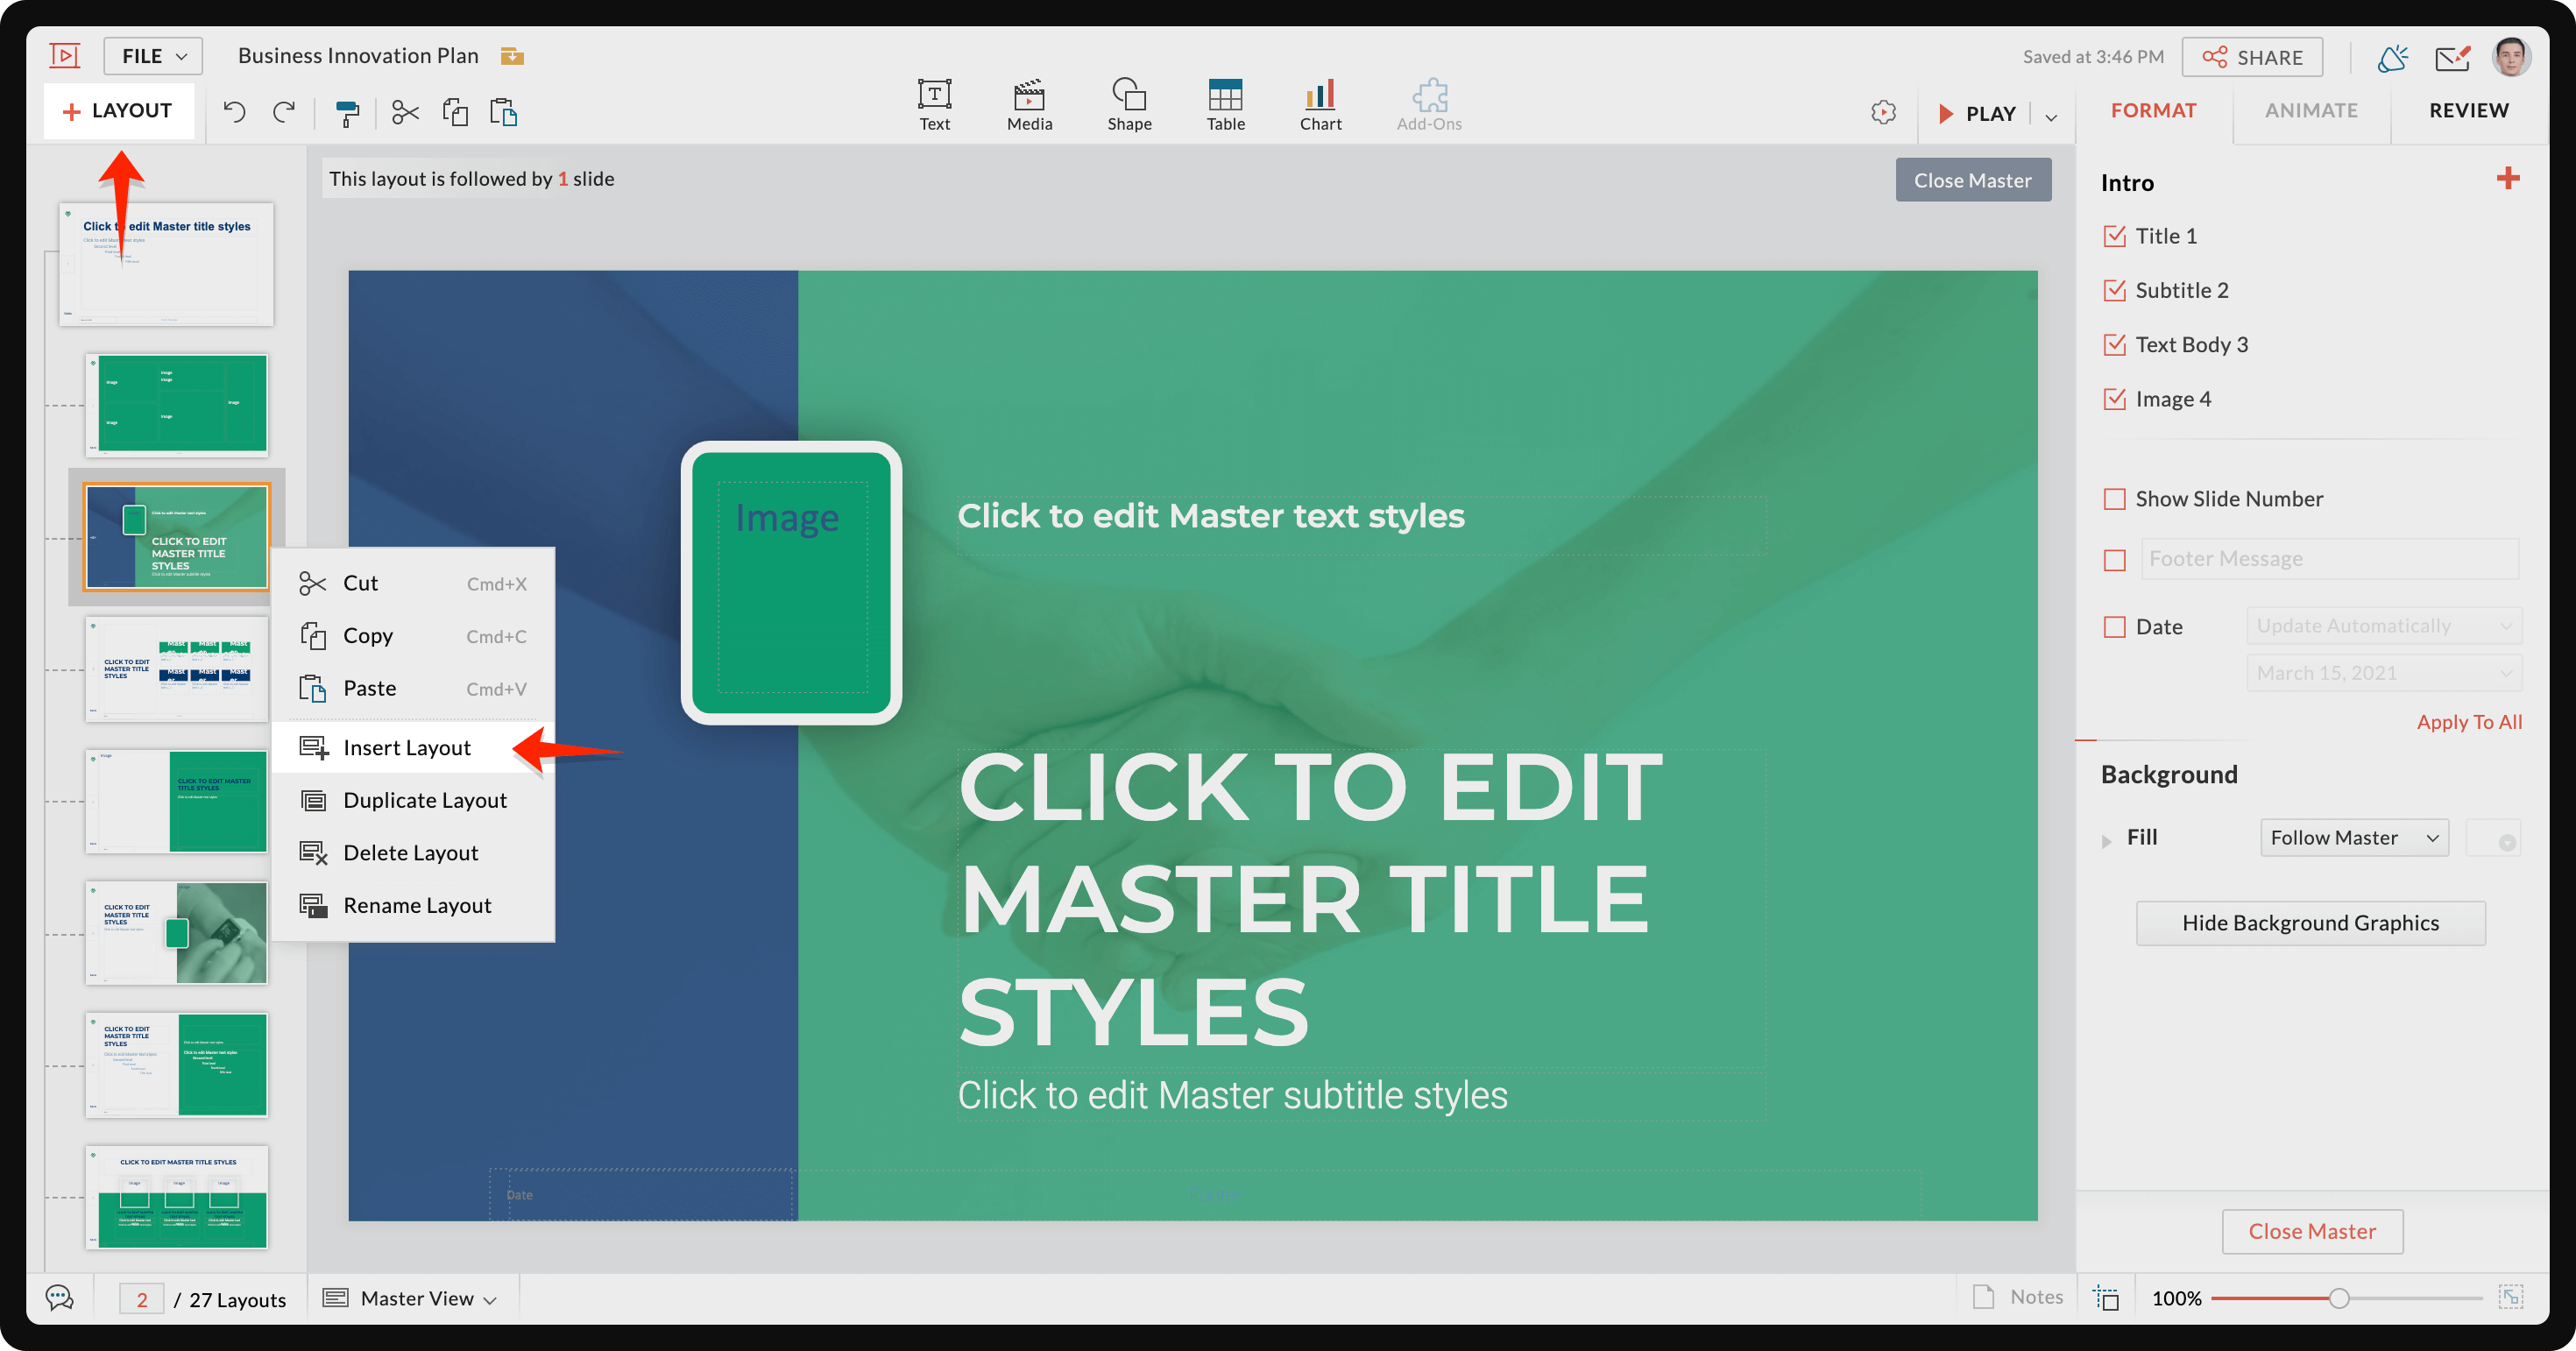 Insert a layout in the Master View 